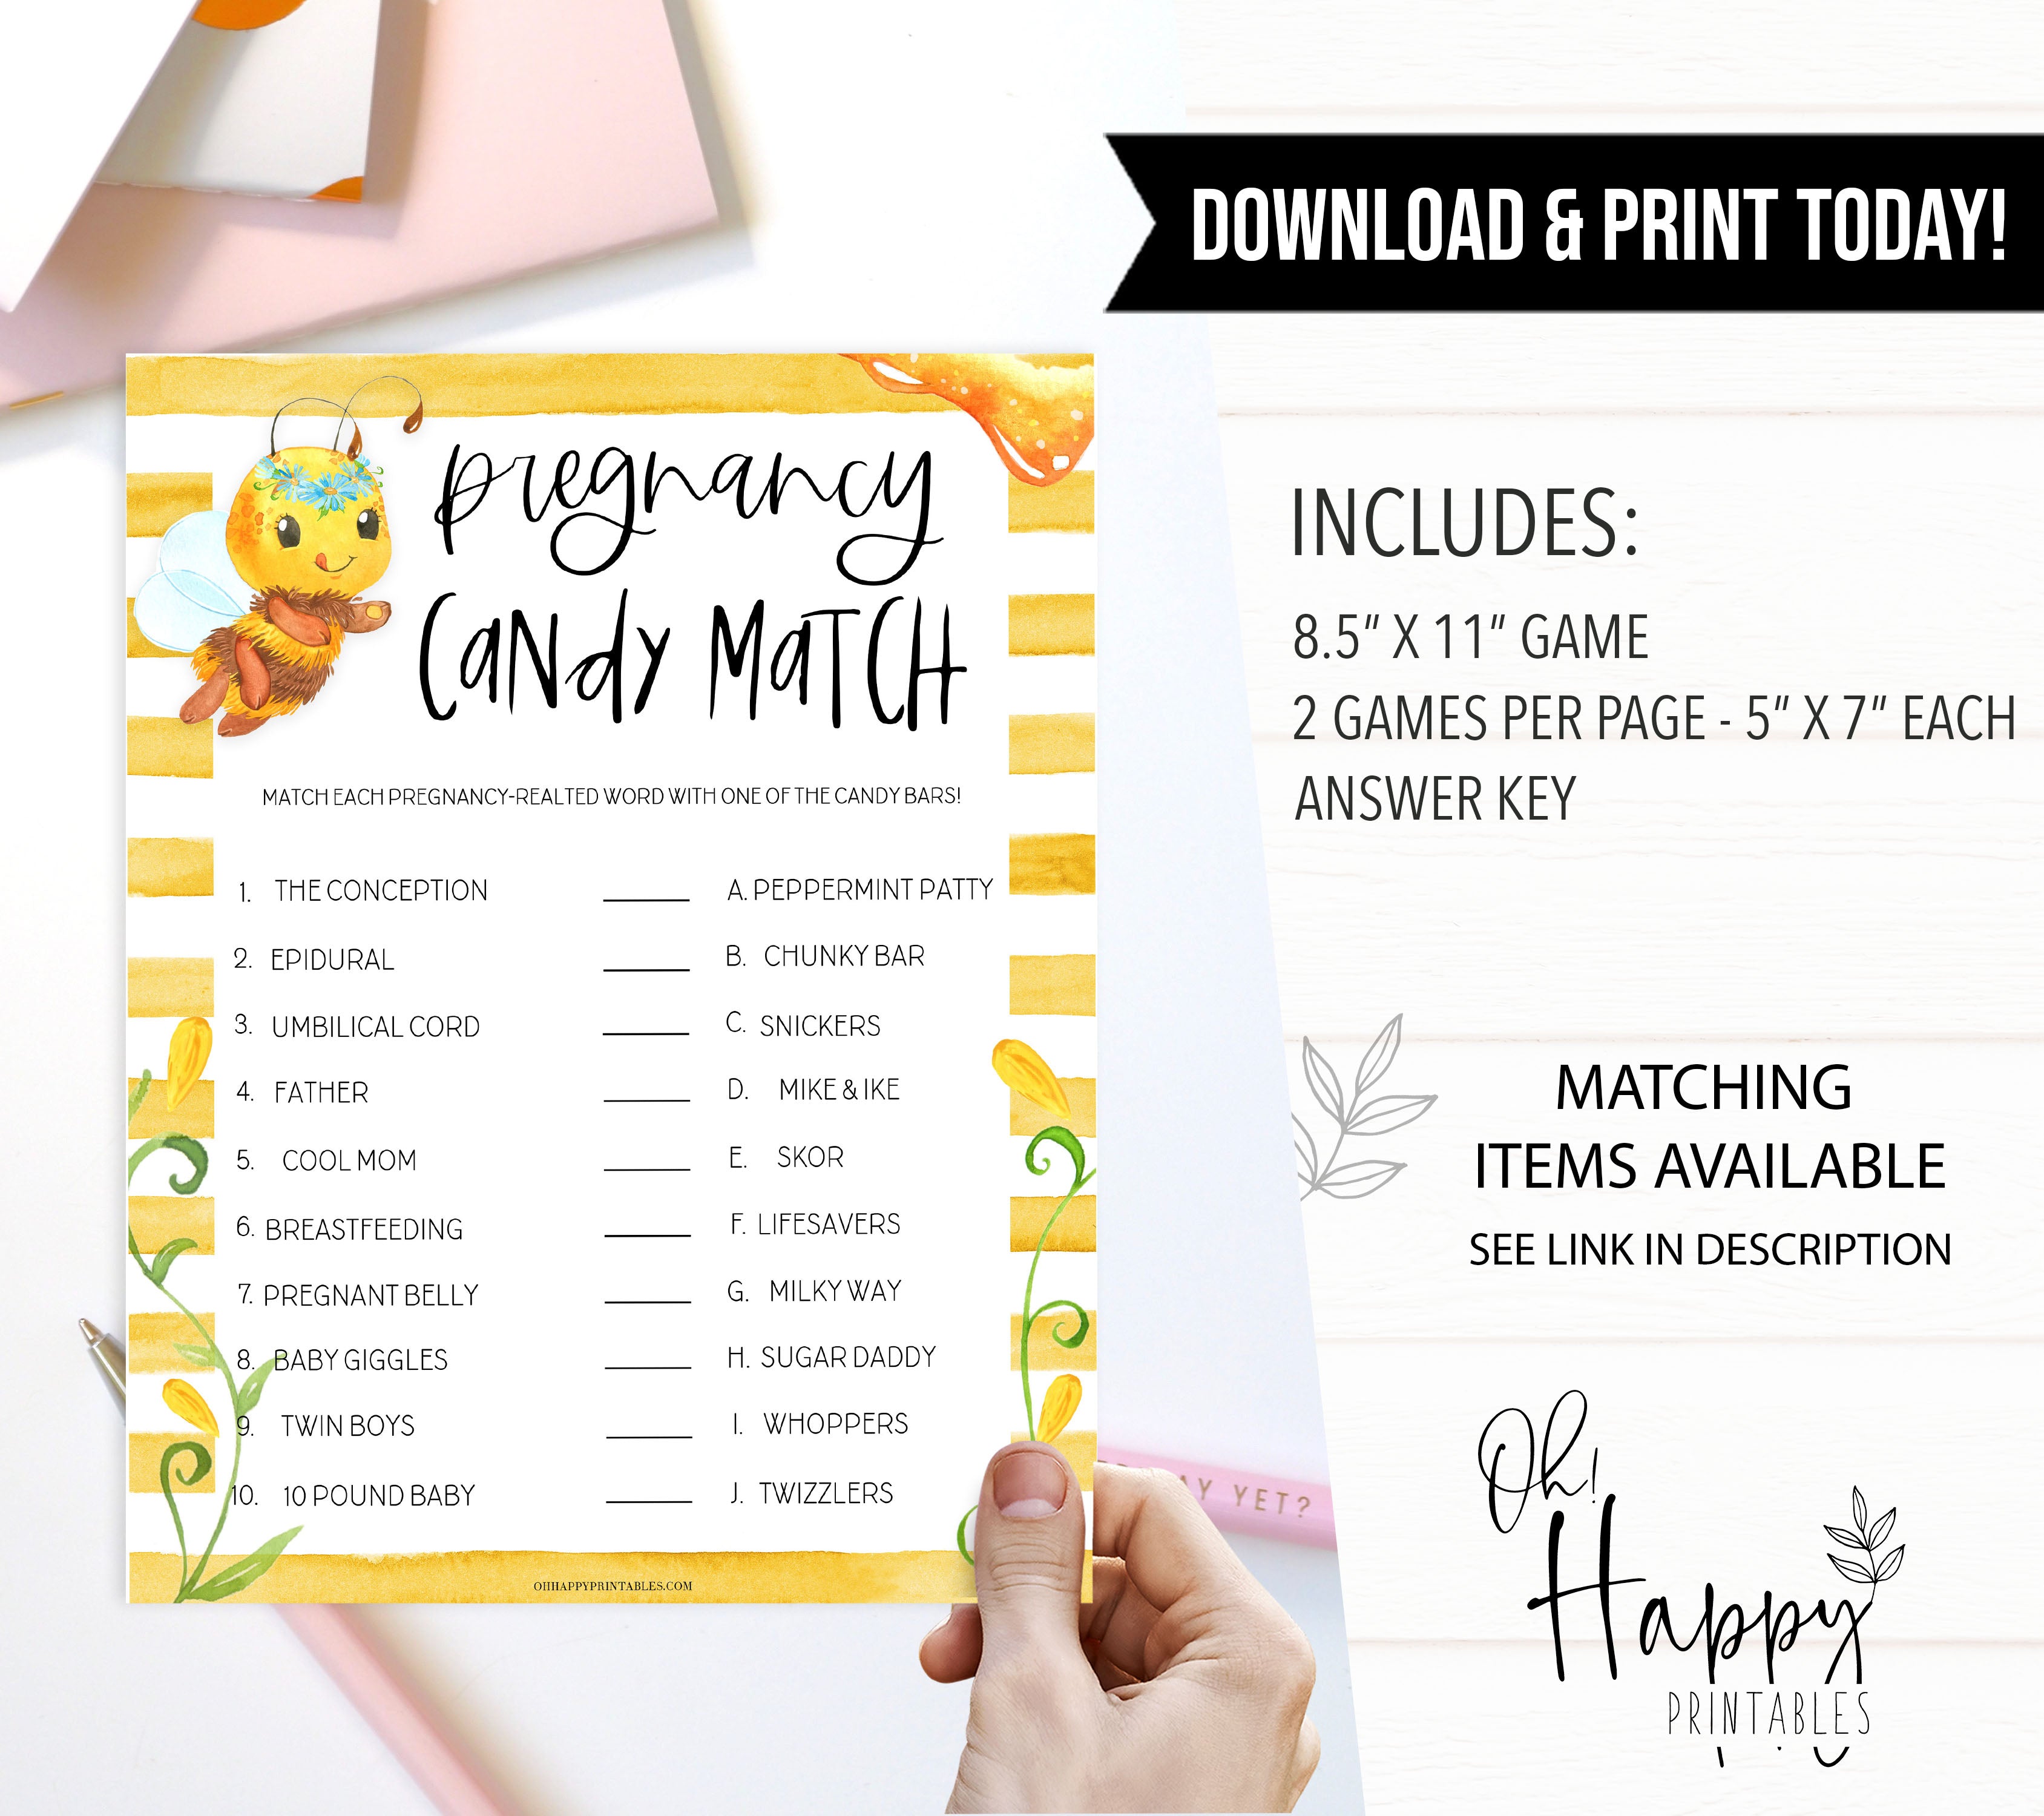 pregnancy candy match game, Printable baby shower games, mommy bee fun baby games, baby shower games, fun baby shower ideas, top baby shower ideas, mommy to bee baby shower, friends baby shower ideas